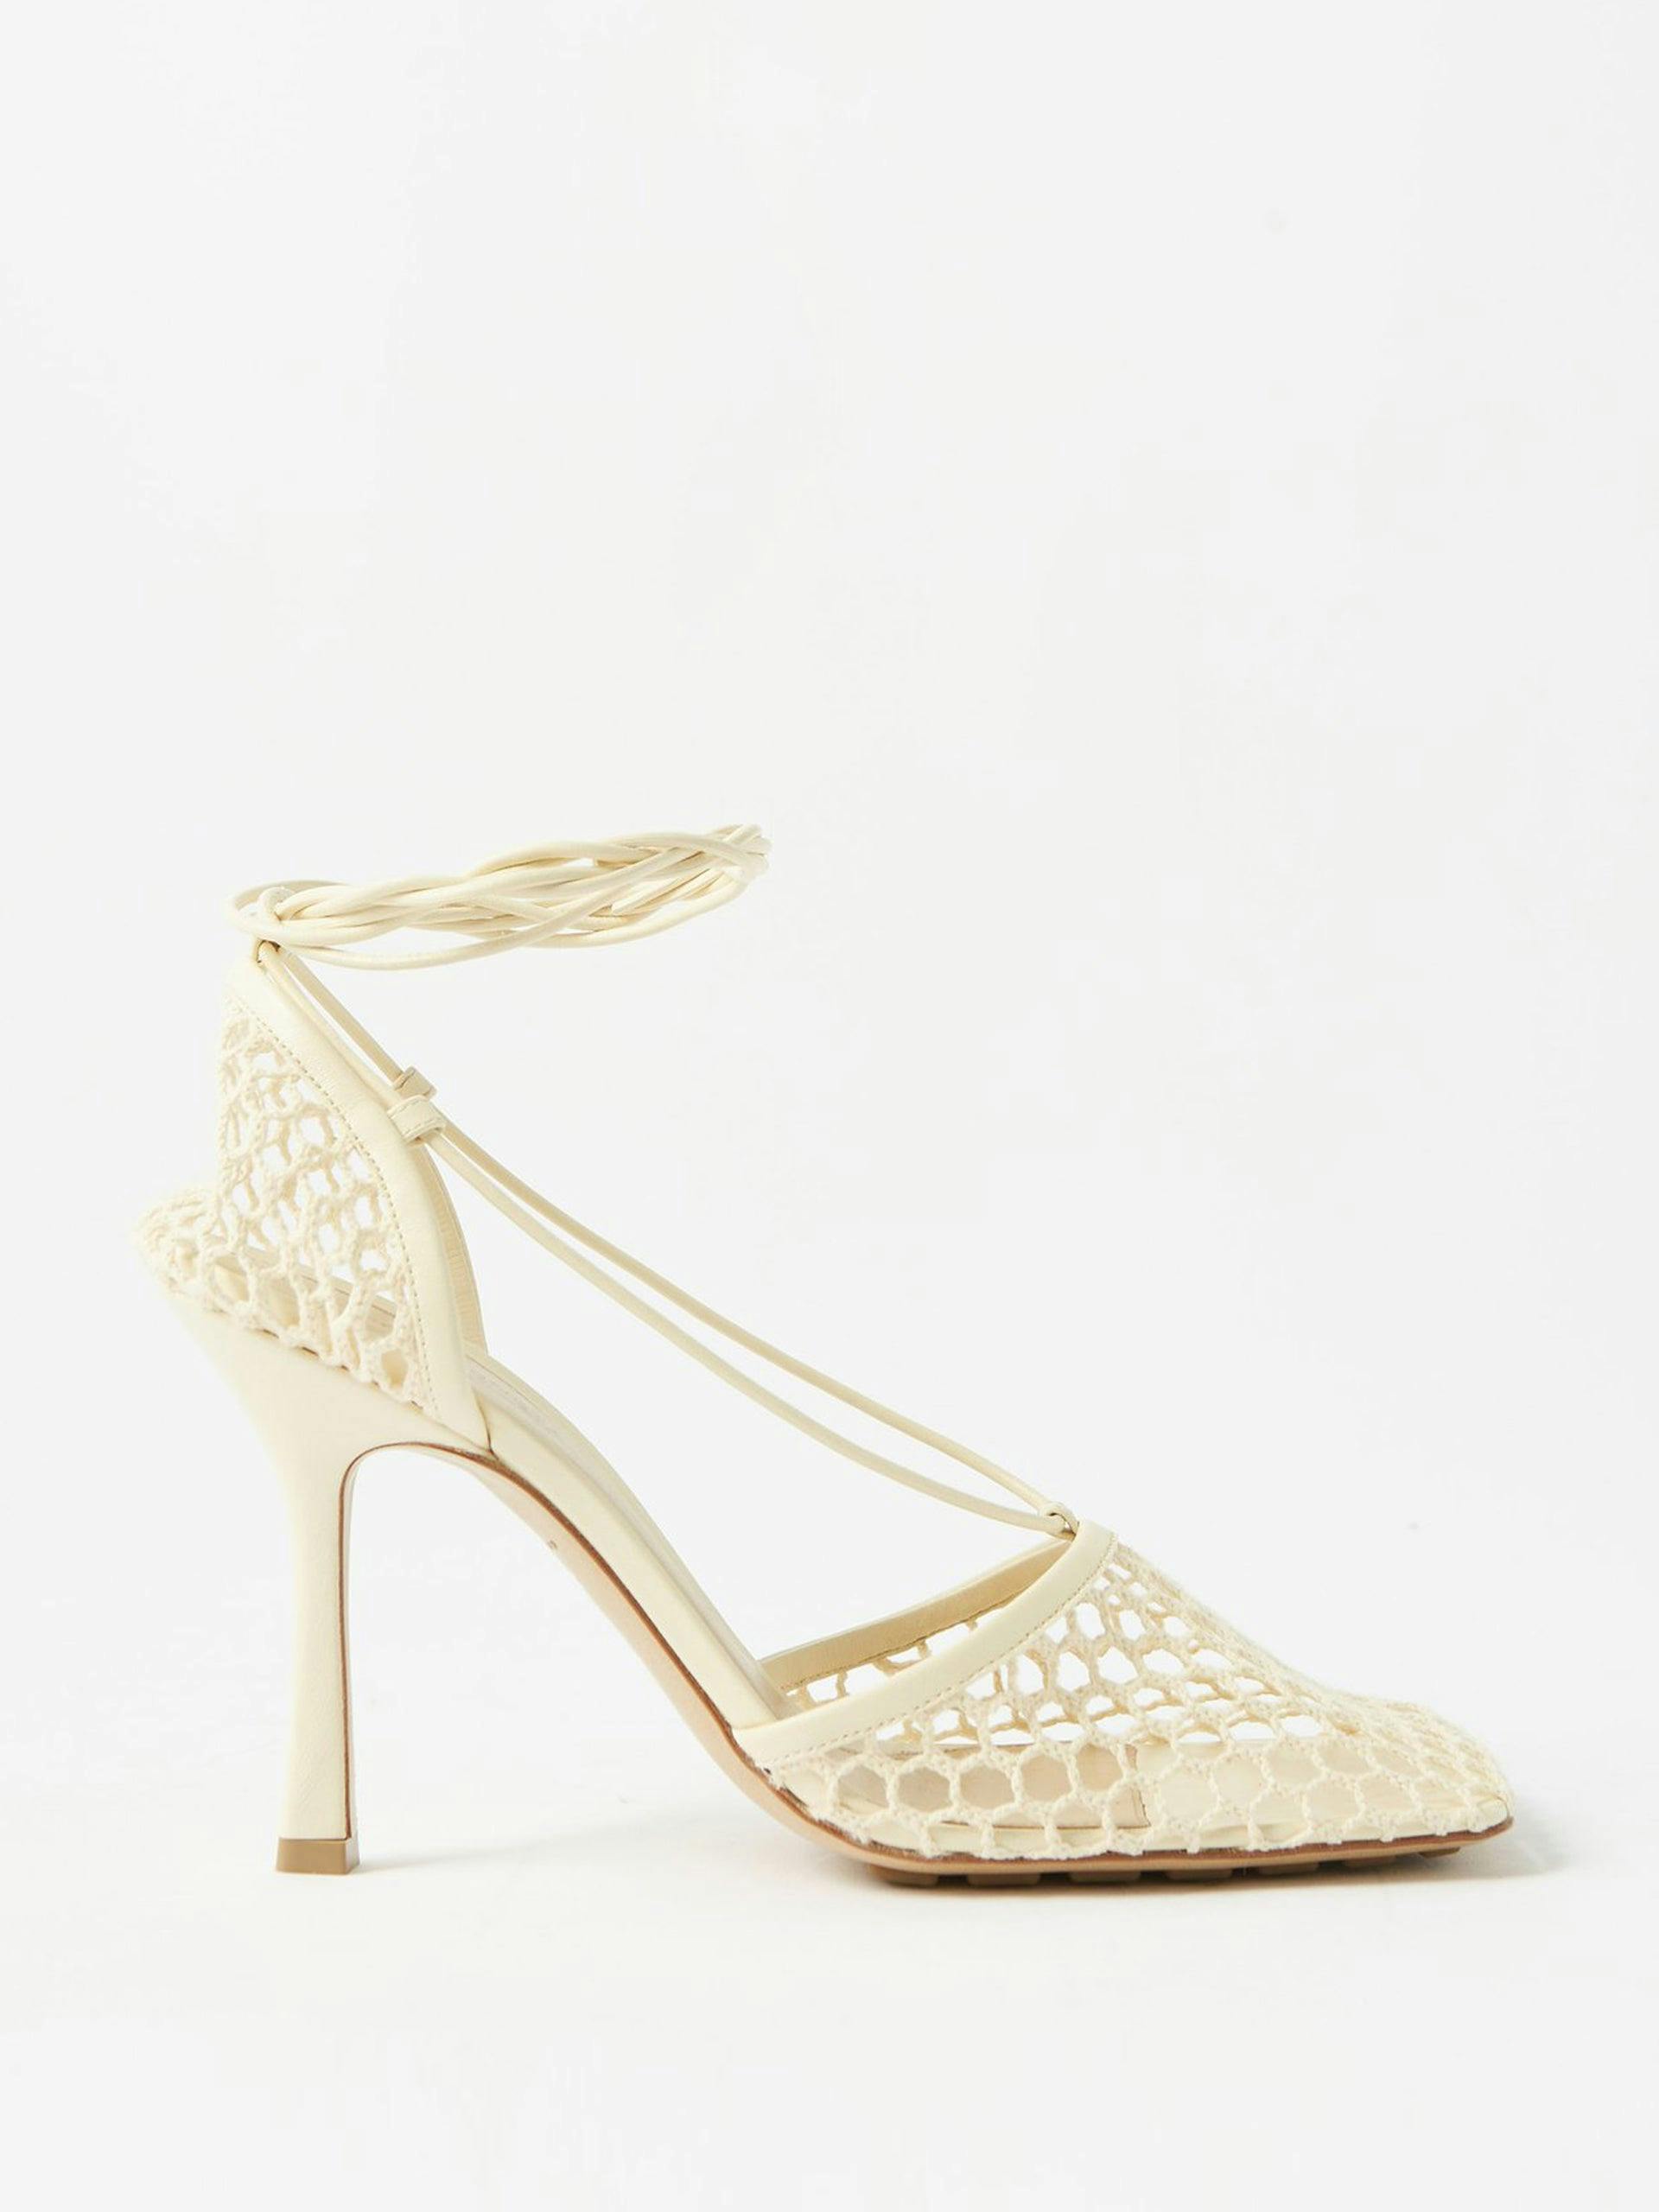 Cream leather and mesh pumps